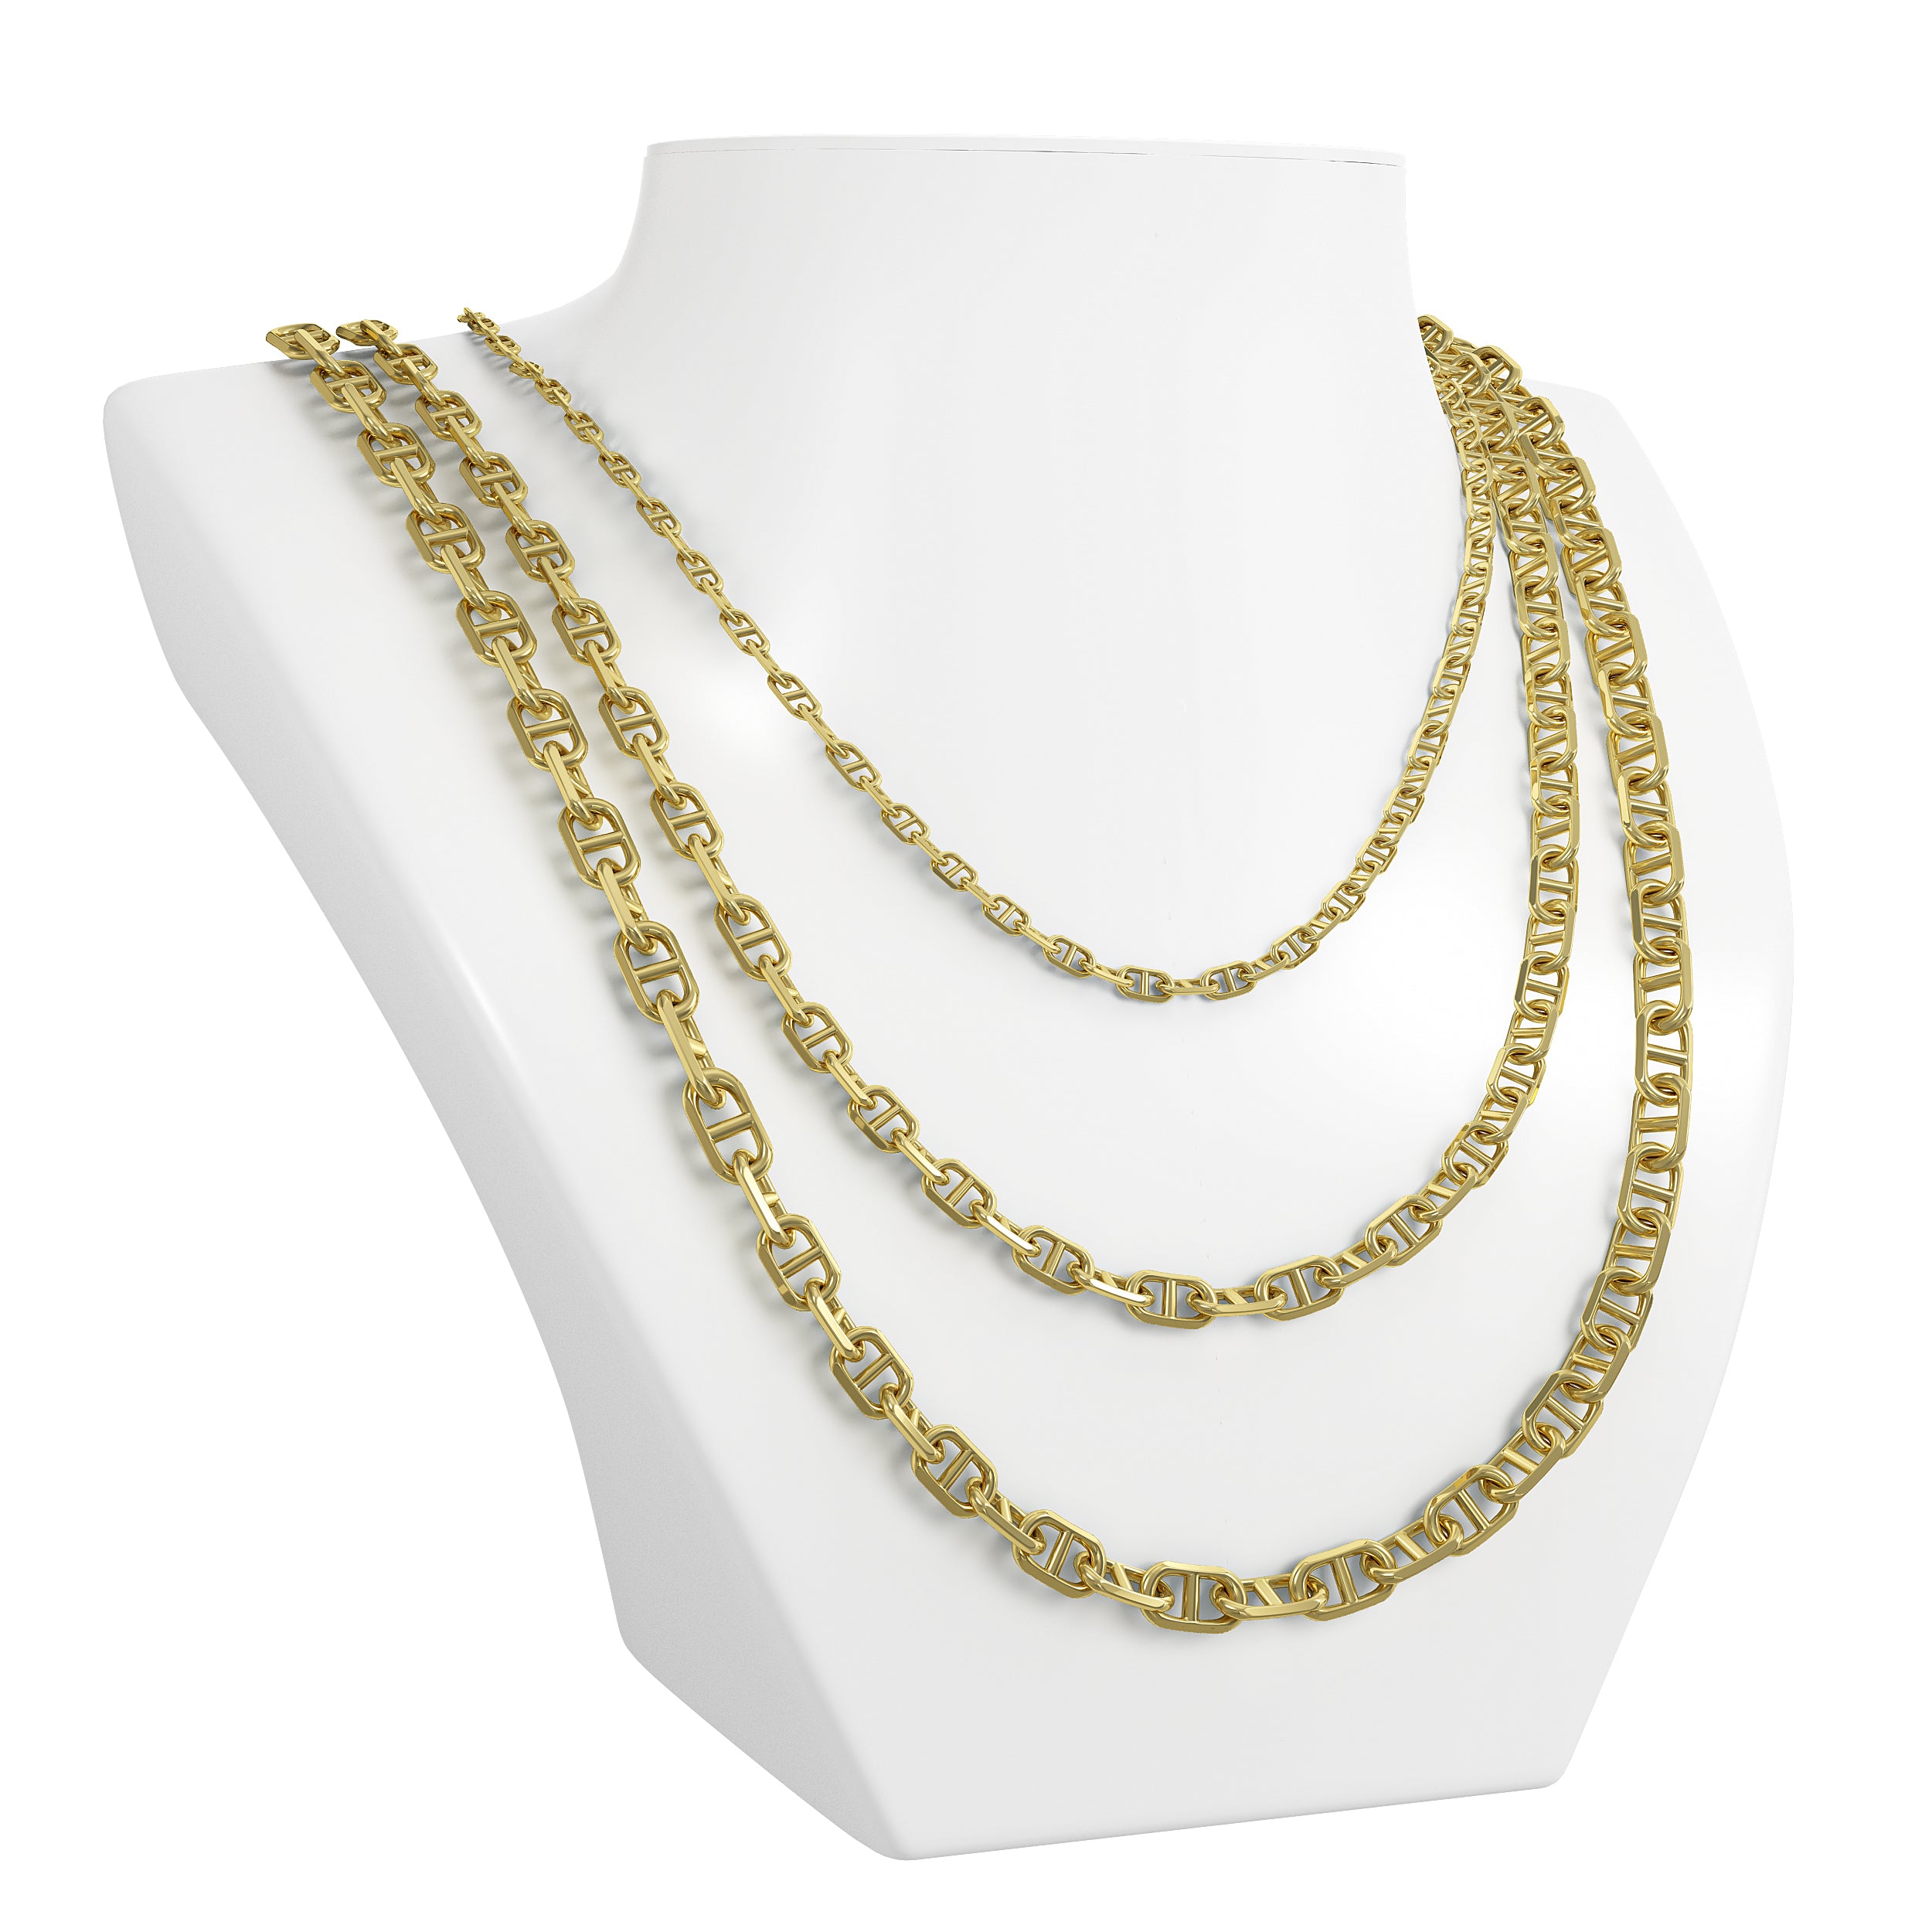 Gold Mariner Chain - Your New Favorite Must-Have Accessory! – Liry's Jewelry